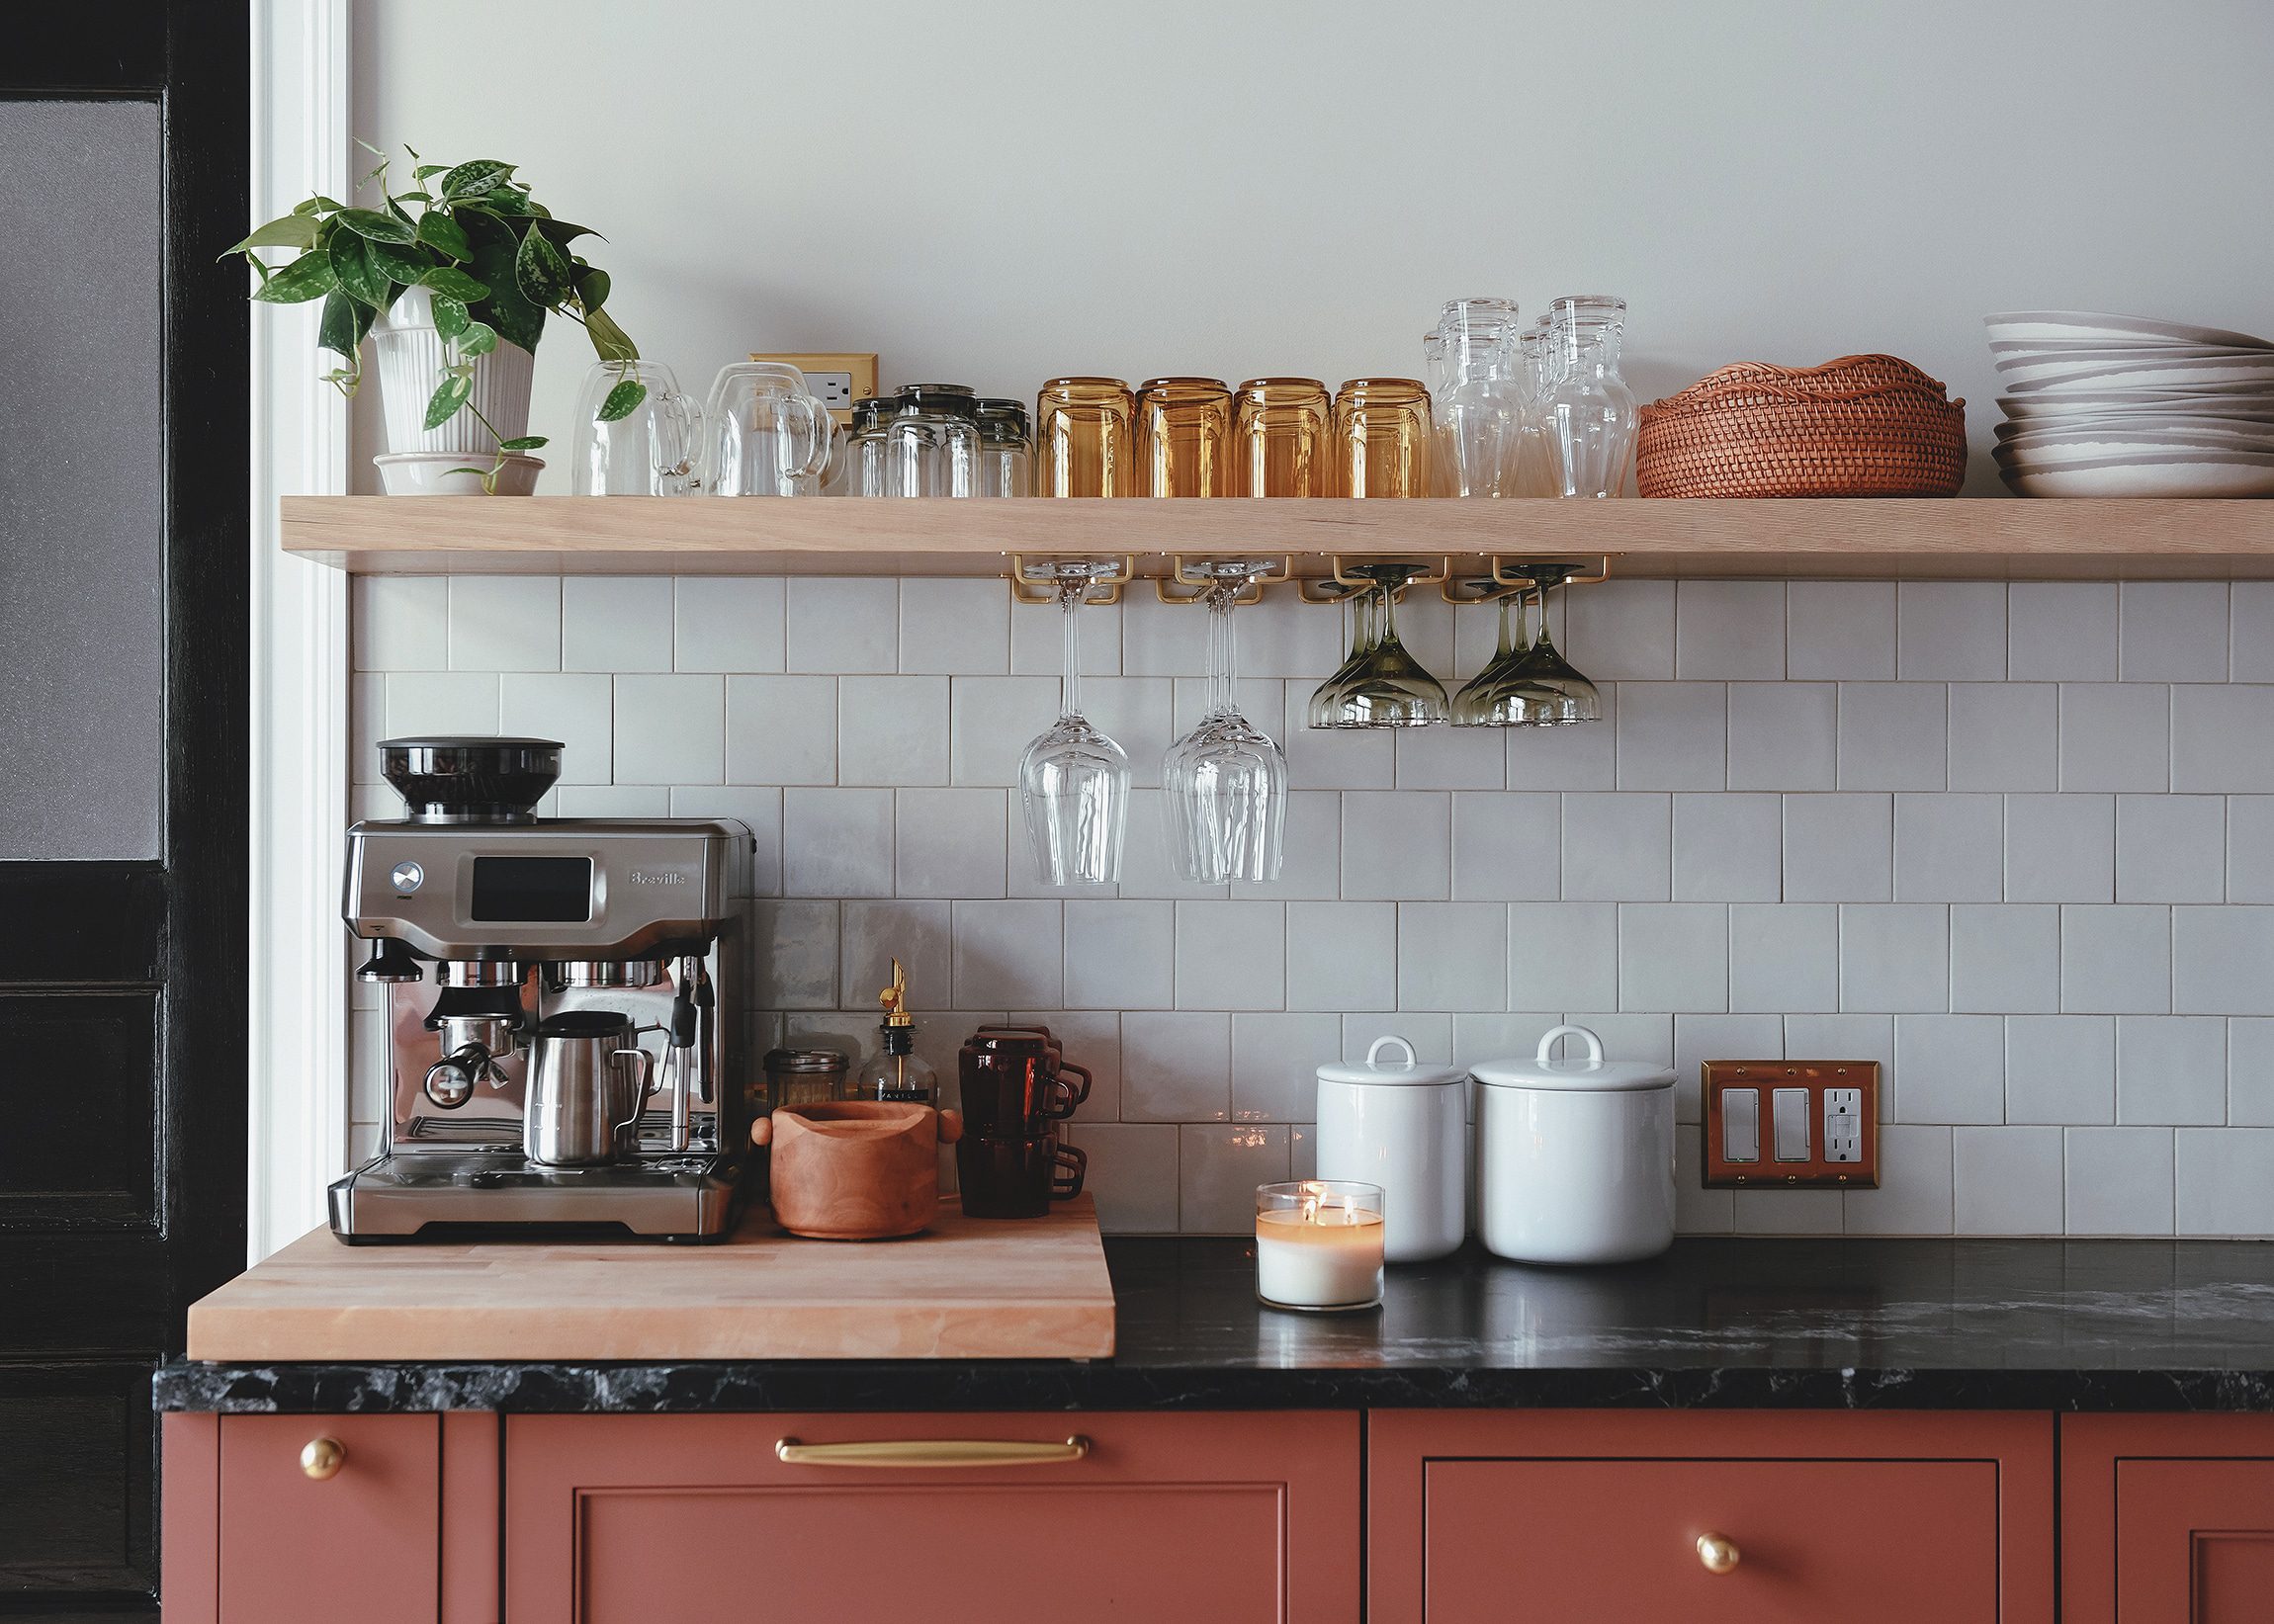 The compact beverage station in our newly remodeled kitchen // via yellow brick home